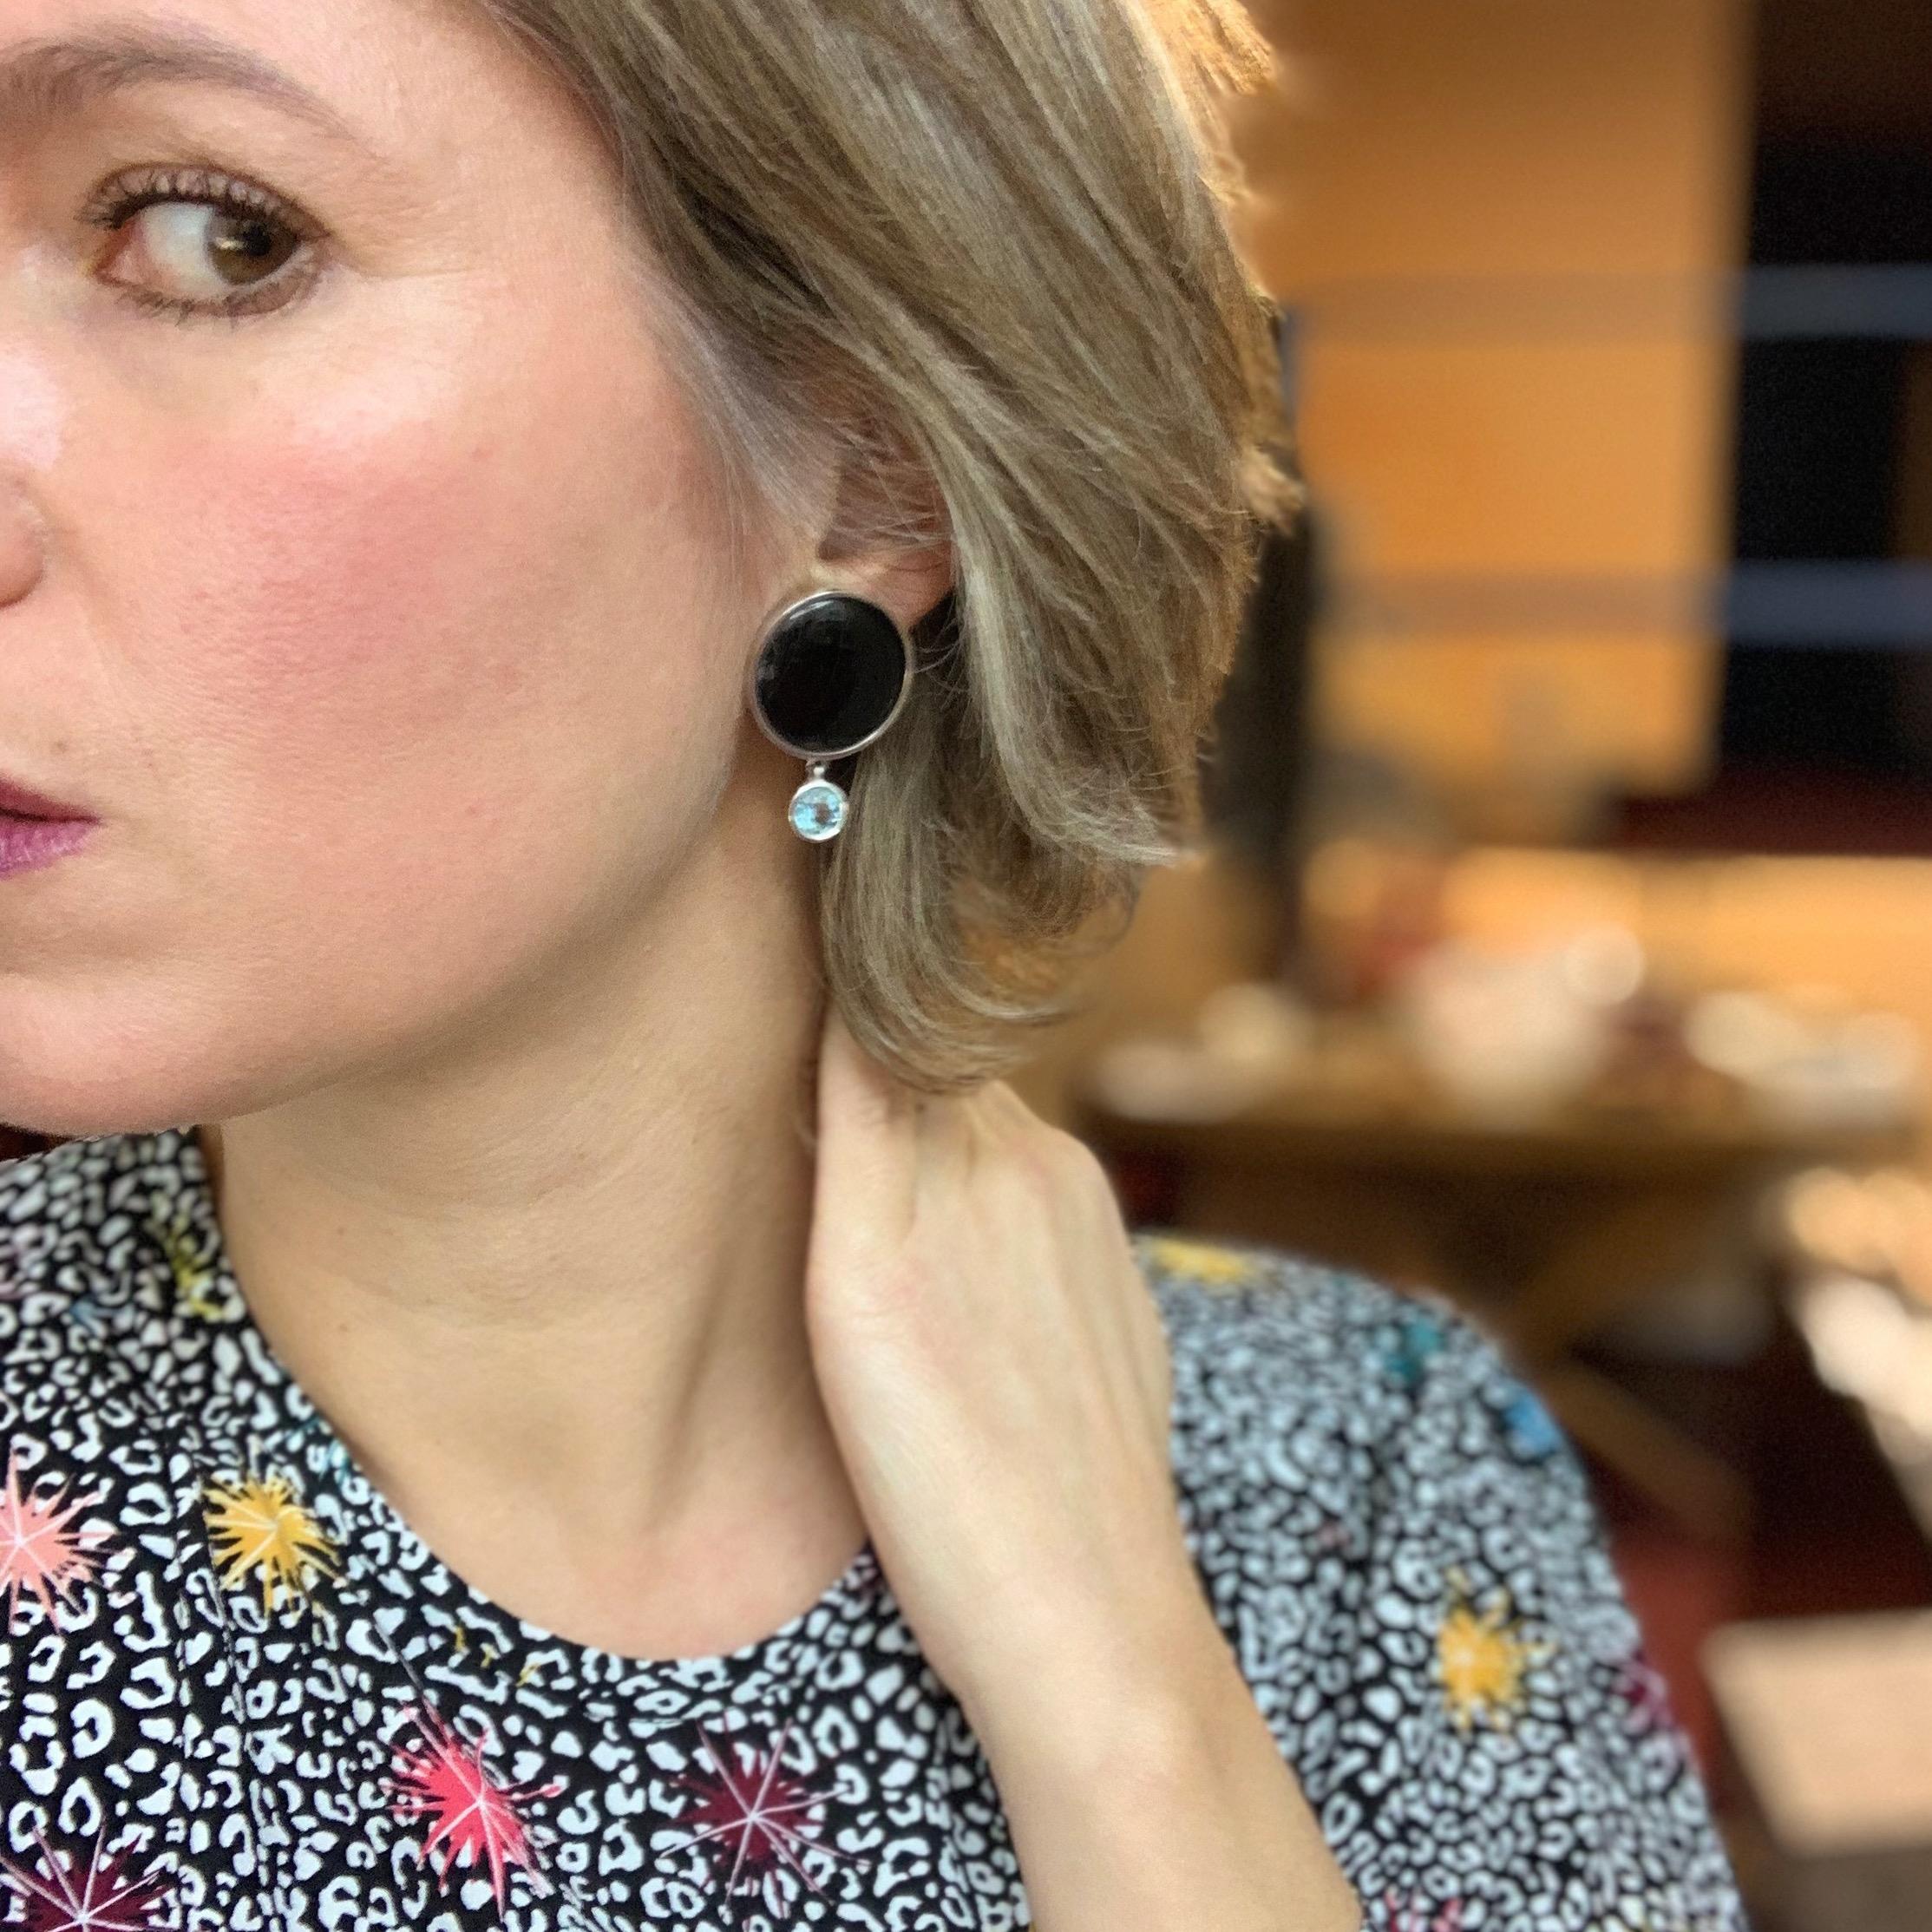 These earrings  are handmade in streling silver with two round onyx pieces that stand on the ear, plus two round aquamarines that hang and have a delicate movement.
The omega clasp allows the earrings to stand perfectly on the ear.
Designed and